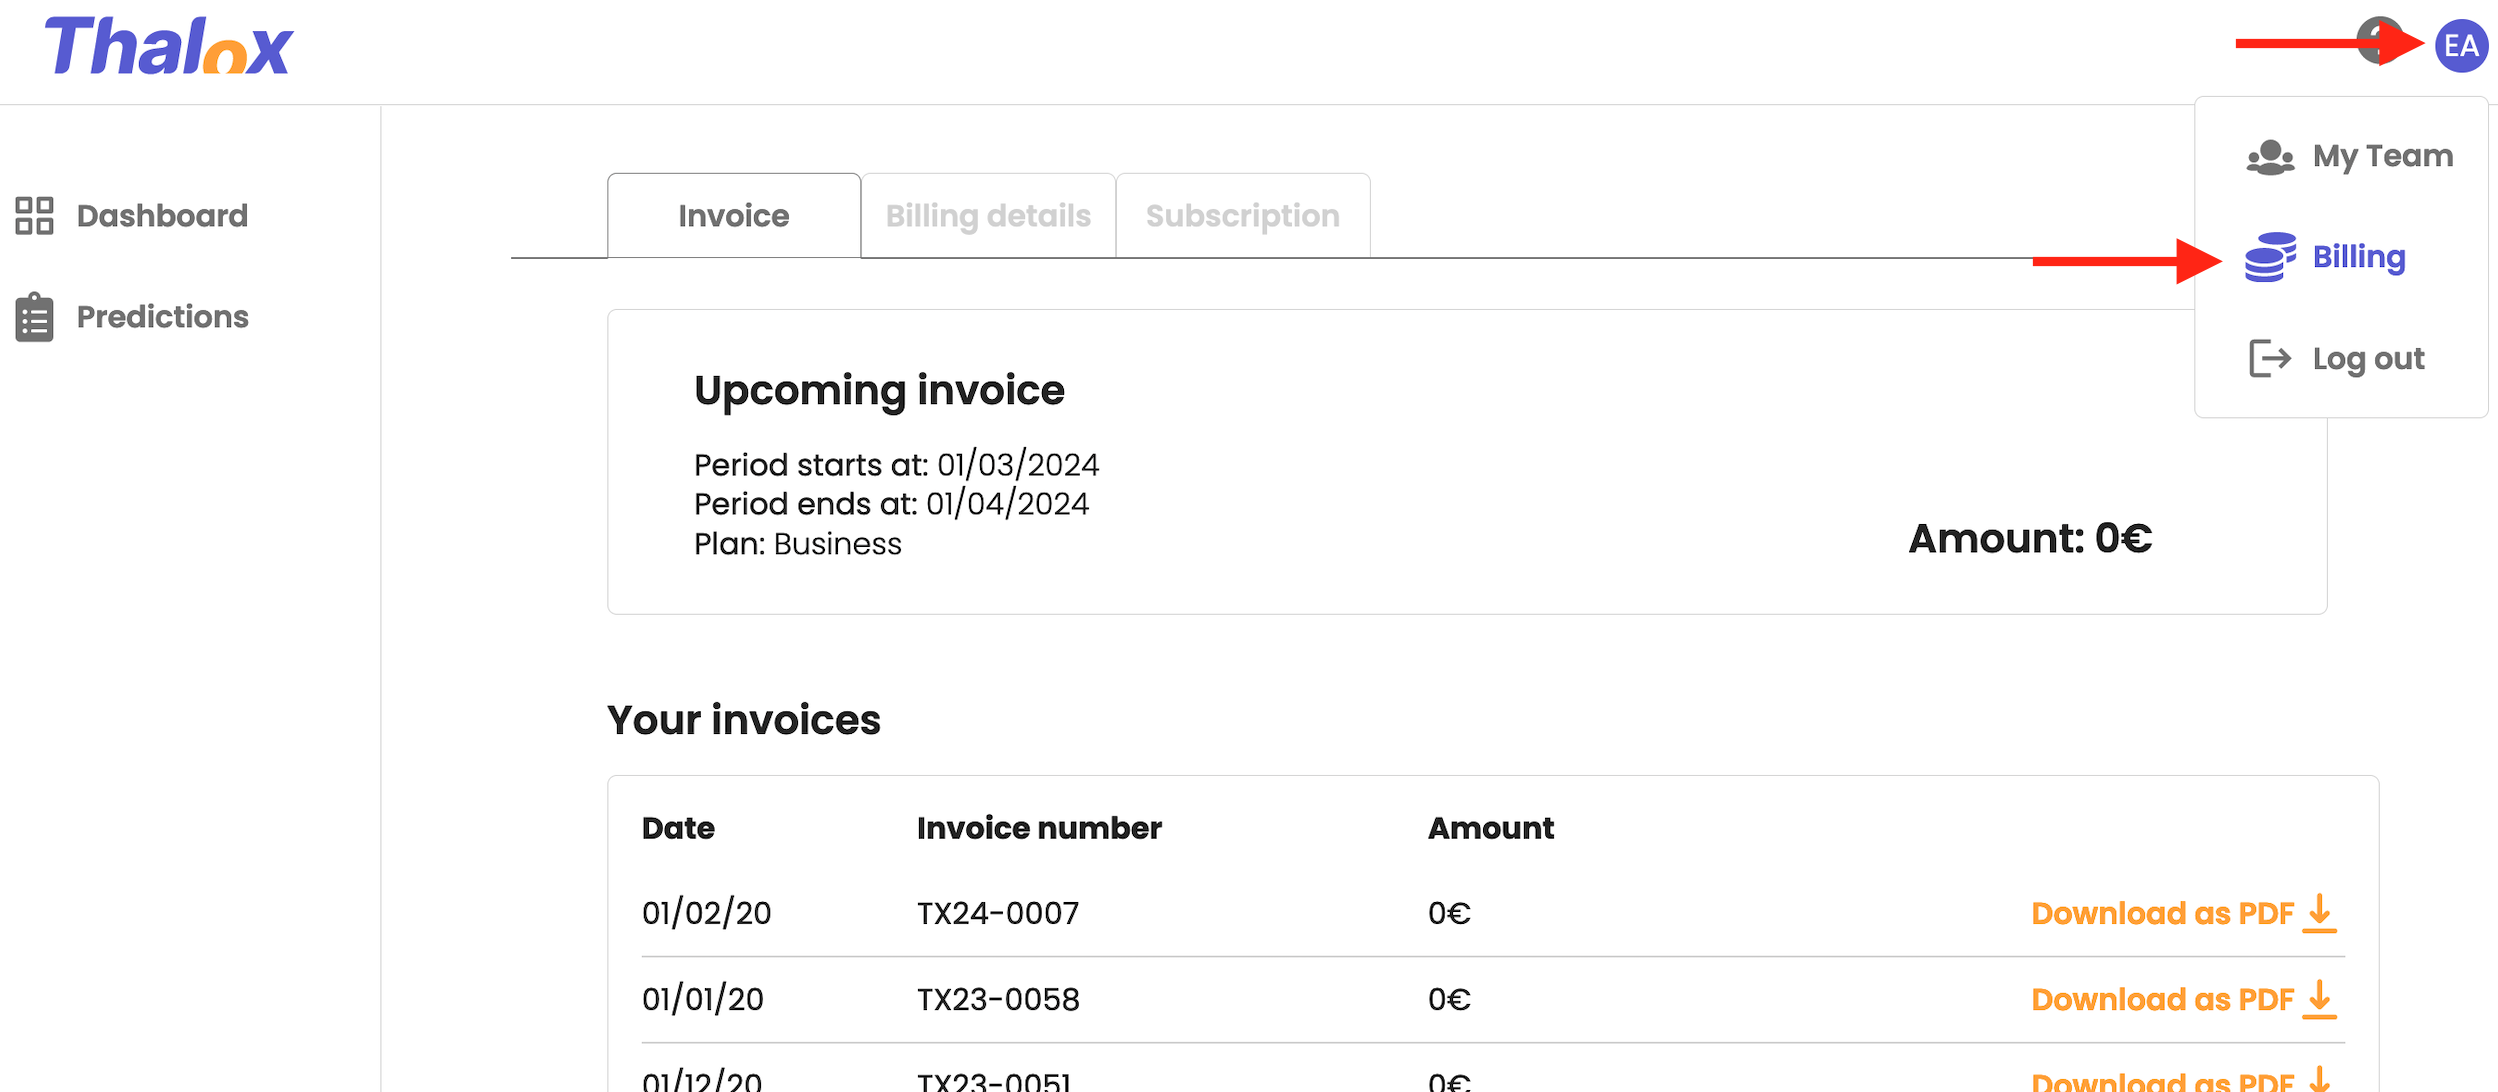 How can I view my invoices - tutorial